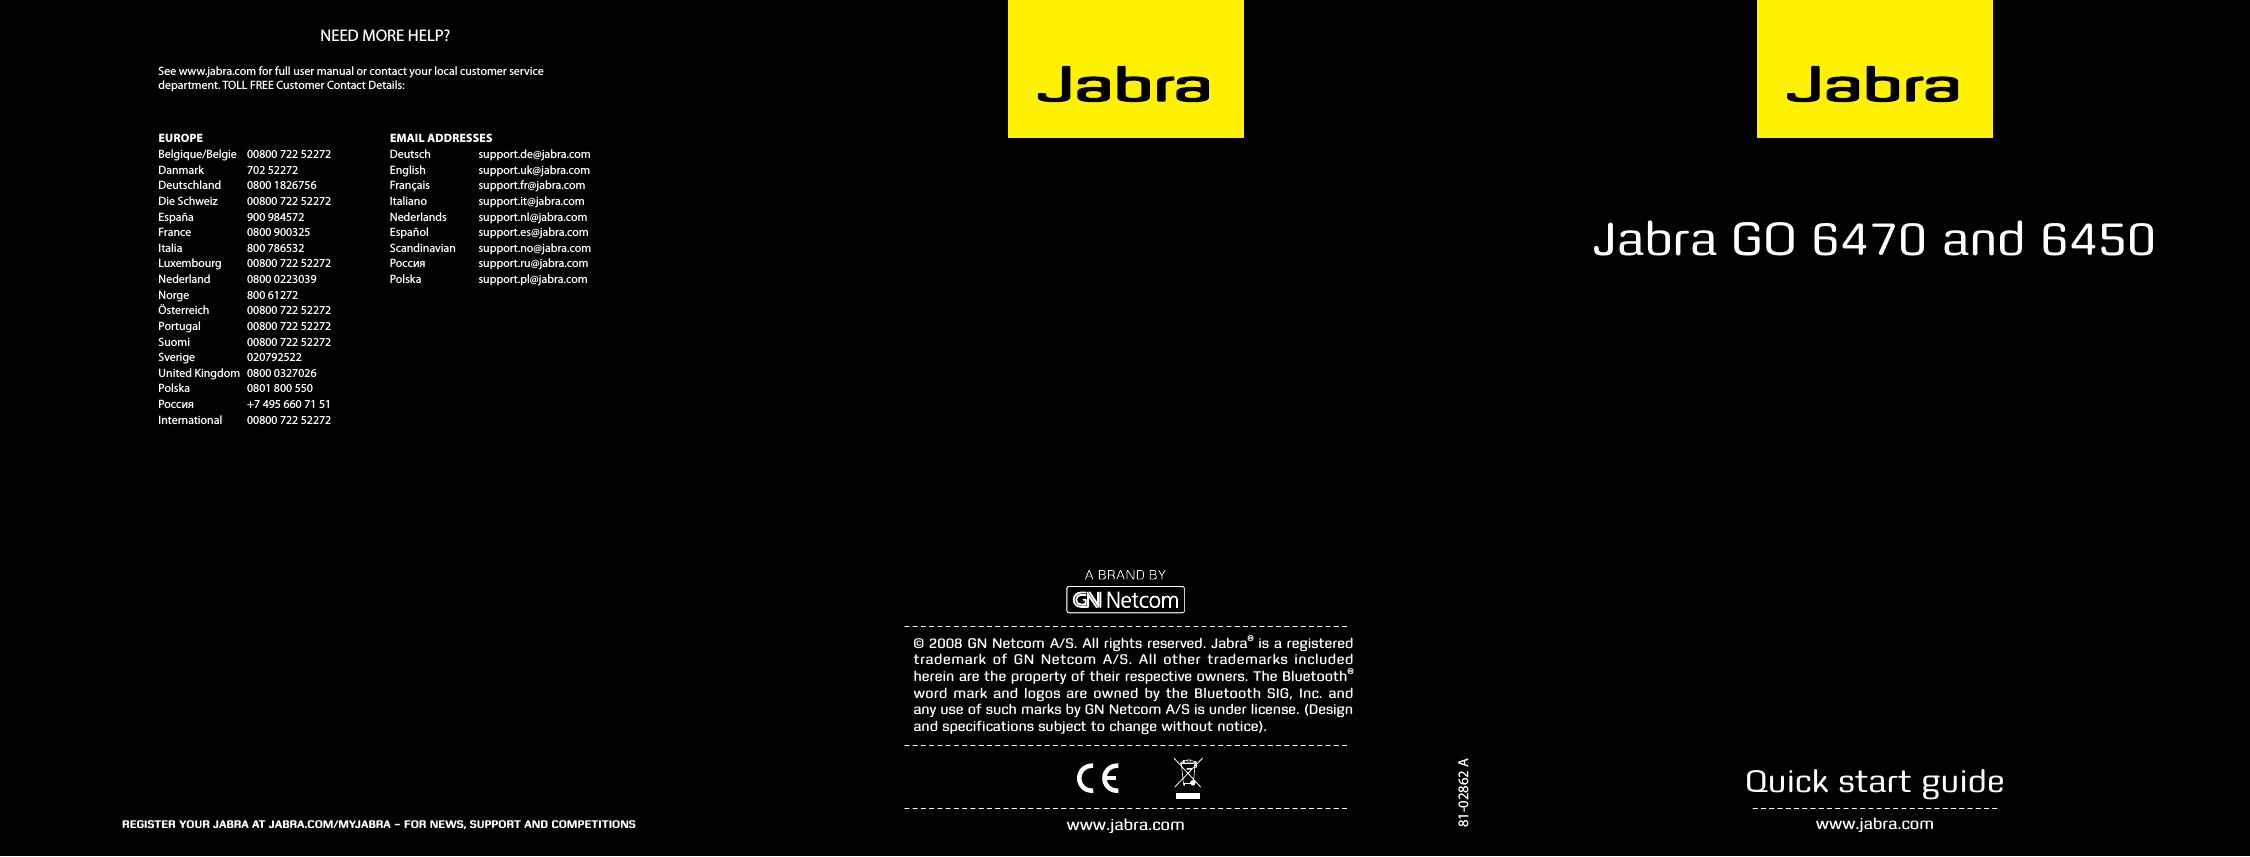 81-02862 AJabra GO 6470 and 6450 www.jabra.comQuick start guide© 2008 GN Netcom A/S. All rights reserved. Jabra® is a registered trademark of GN Netcom A/S. All other trademarks included herein are the property of their respective owners. The Bluetooth® word mark and logos are owned by the Bluetooth SIG, Inc. and any use of such marks by GN Netcom A/S is under license. (Design and speciﬁcations subject to change without notice).www.jabra.comNEED MORE HELP?EUROPEBelgique/Belgie  00800 722 52272Danmark  702 52272Deutschland  0800 1826756Die Schweiz  00800 722 52272España  900 984572France  0800 900325Italia  800 786532Luxembourg  00800 722 52272Nederland  0800 0223039Norge  800 61272Österreich  00800 722 52272Portugal  00800 722 52272Suomi  00800 722 52272Sverige  020792522United Kingdom  0800 0327026Polska  0801 800 550Россия  +7 495 660 71 51International  00800 722 52272EMAIL ADDRESSESDeutsch  support.de@jabra.comEnglish  support.uk@jabra.comFrançais  support.fr@jabra.comItaliano  support.it@jabra.comNederlands  support.nl@jabra.comEspañol  support.es@jabra.comScandinavian  support.no@jabra.comРоссия   support.ru@jabra.comPolska  support.pl@jabra.comRegisteR youR JabRa at JabRa.com/myJabRa – foR news, suppoRt and competitionsSee www.jabra.com for full user manual or contact your local customer service  department. TOLL FREE Customer Contact Details: